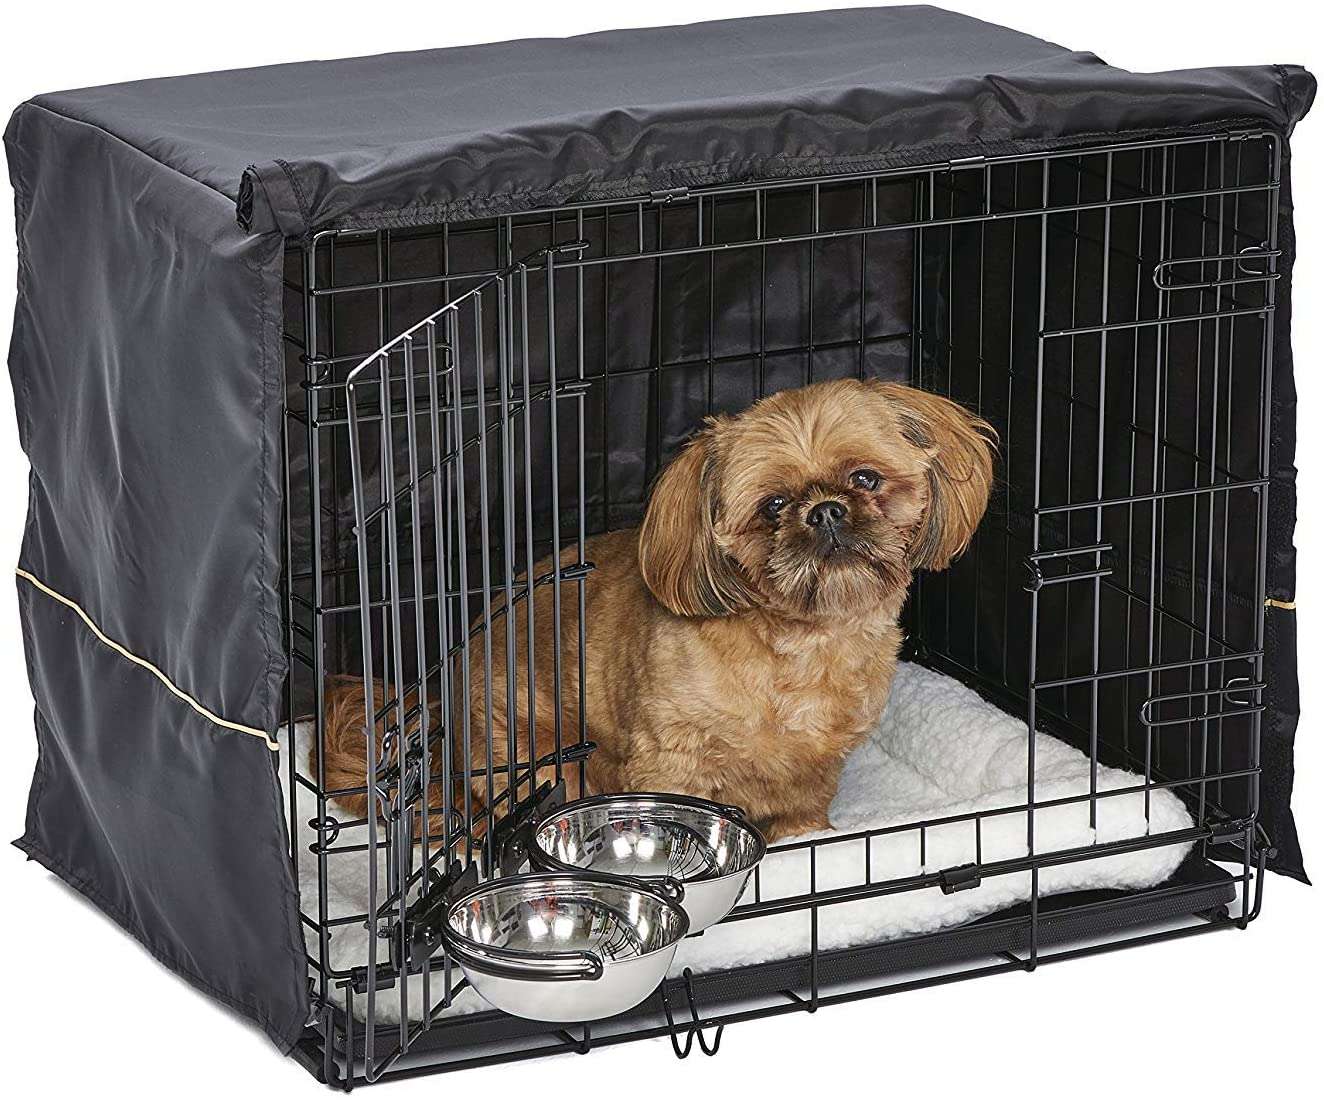 Midwest iCrater dog crate